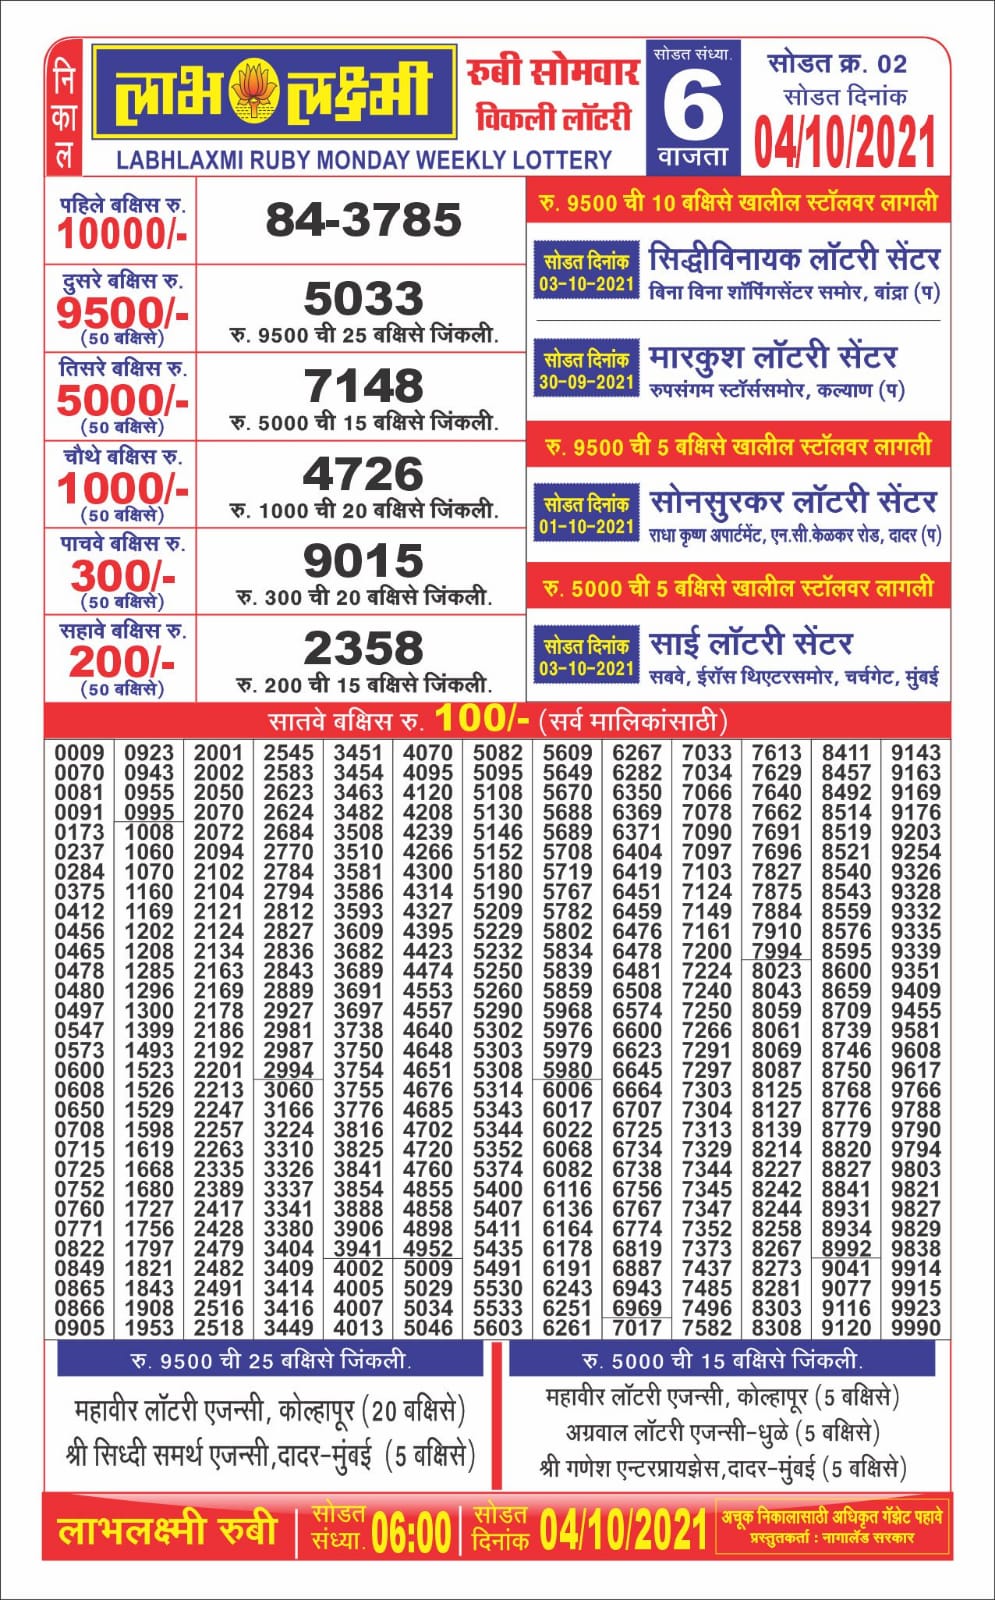 Labhlaxmi 6 PM lottery result 04-10-2021